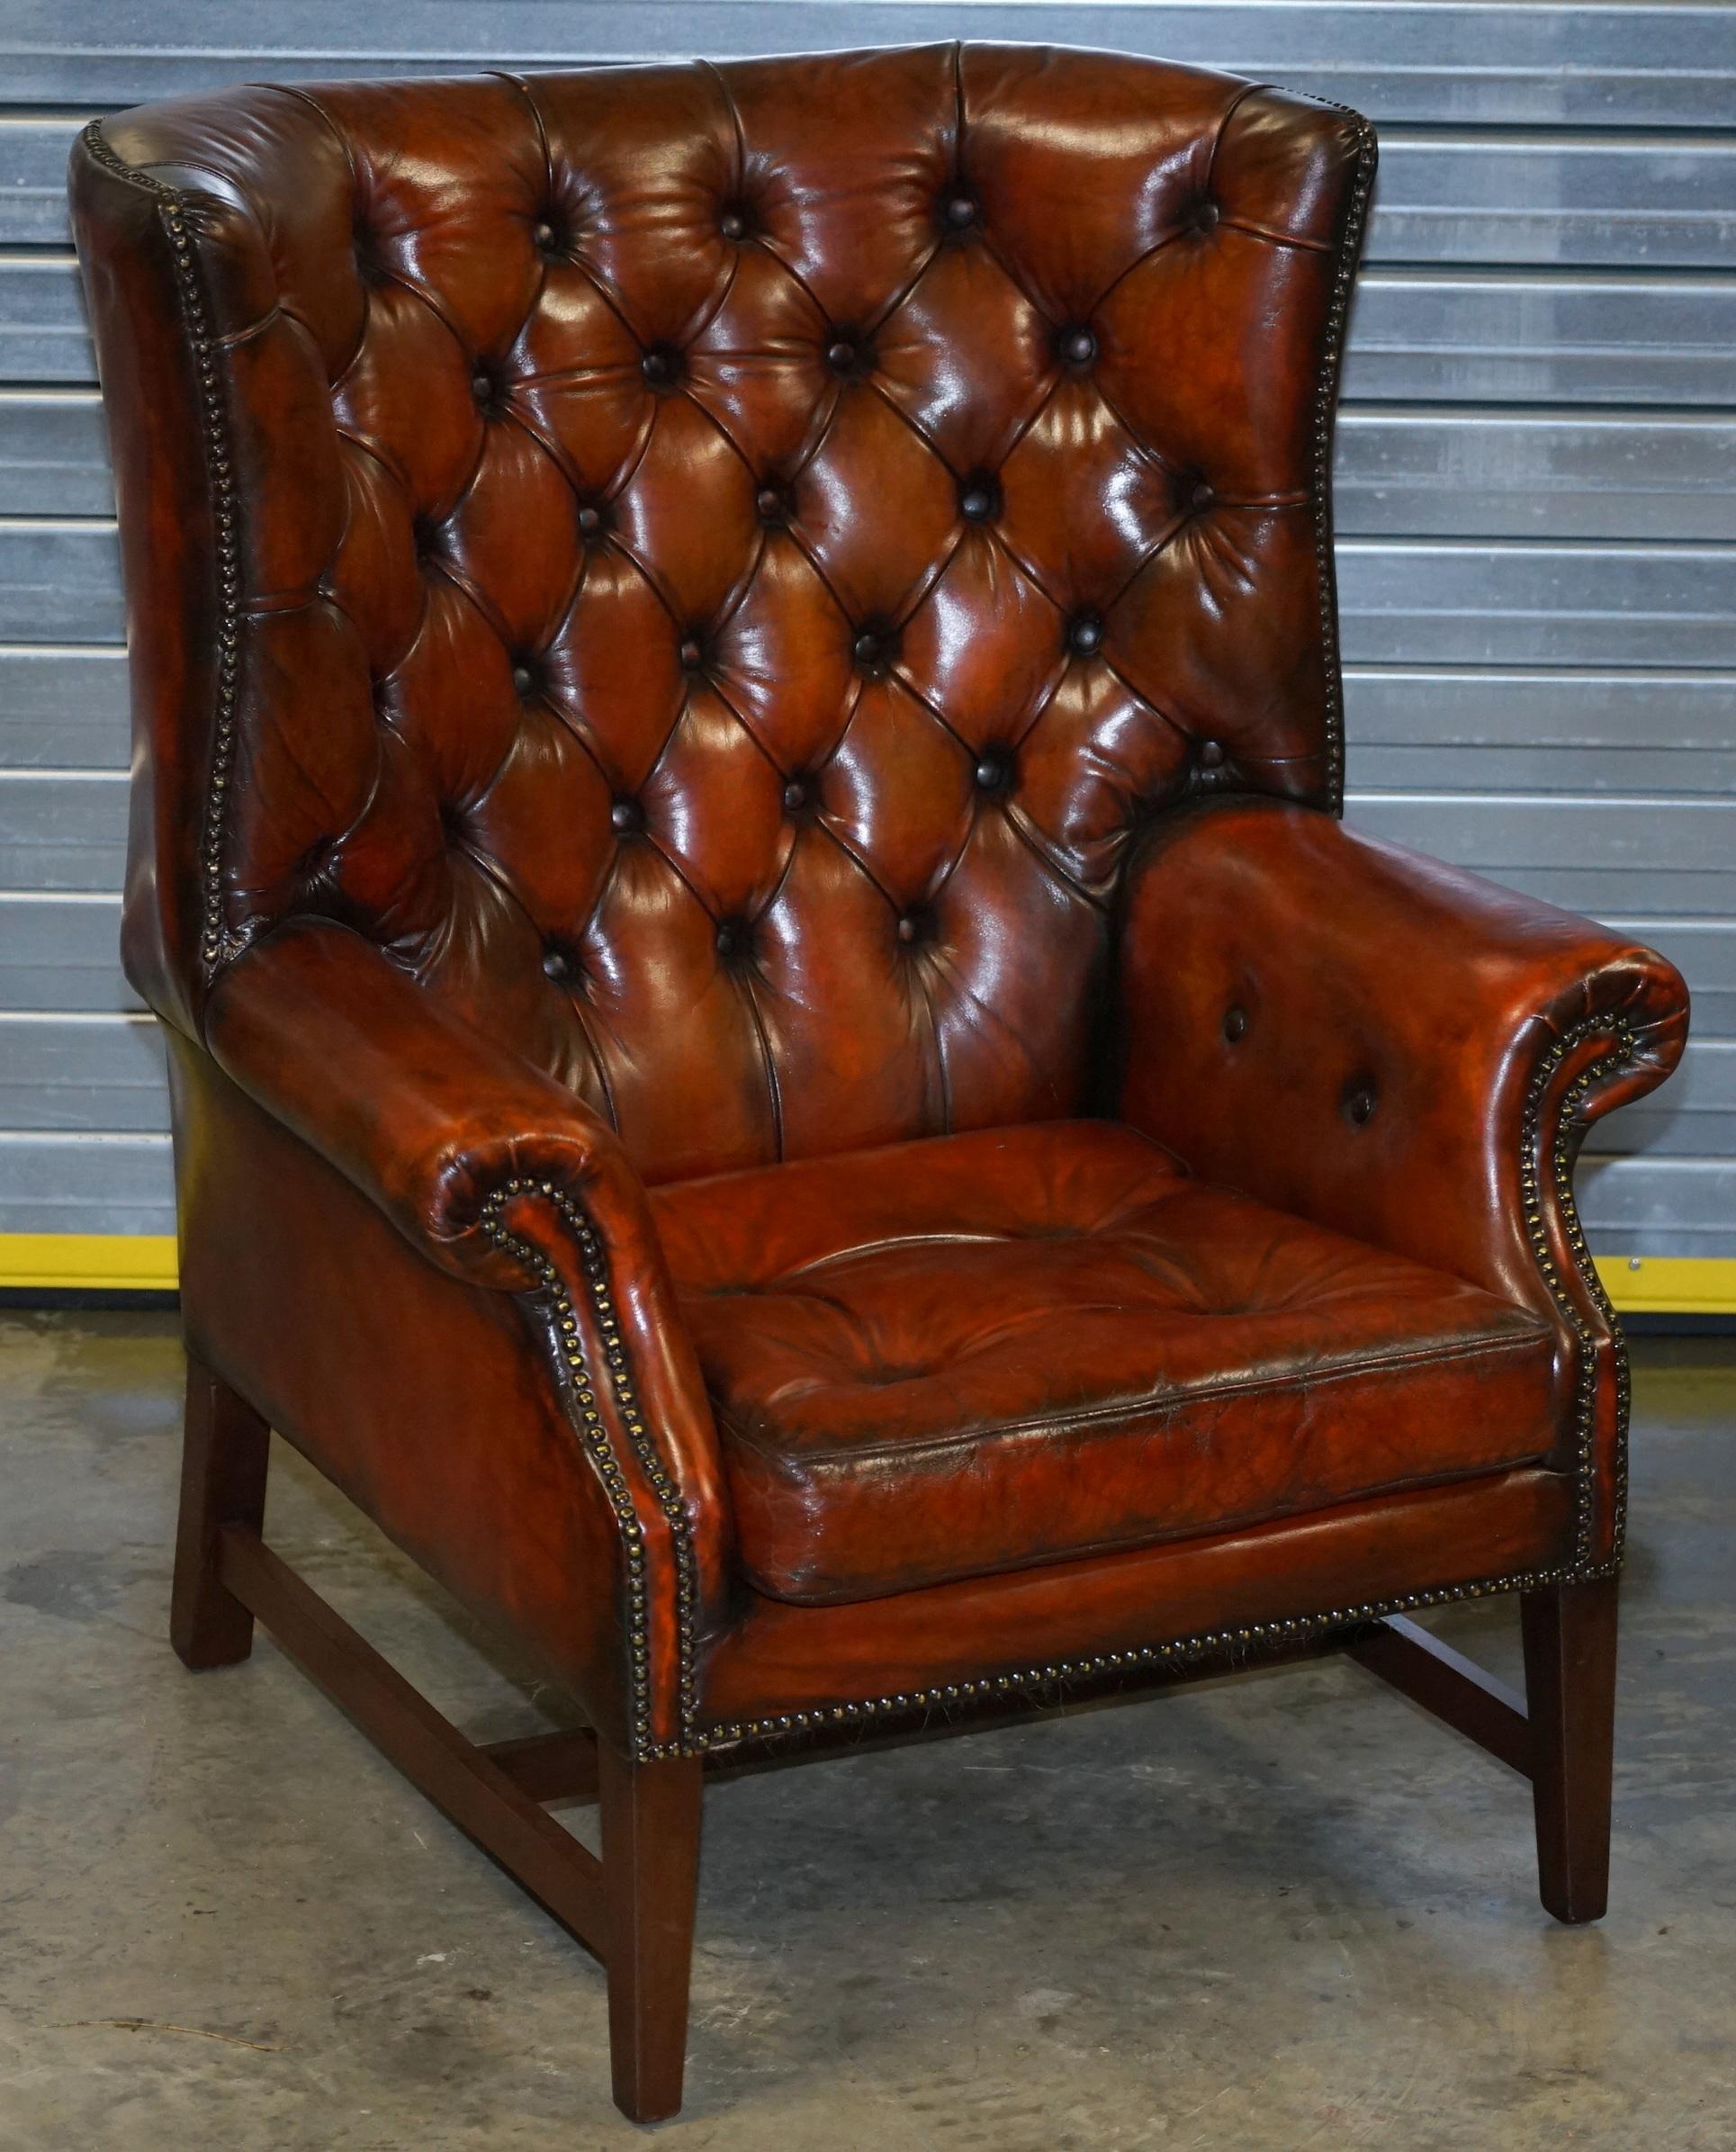 We are delighted to offer for sale this stunning pair of lovely fully restored vintage Porters barrel back armchairs in whisky brown leather 

These chairs are a real tour de force, they have absolutely everything going for them, the leather hide